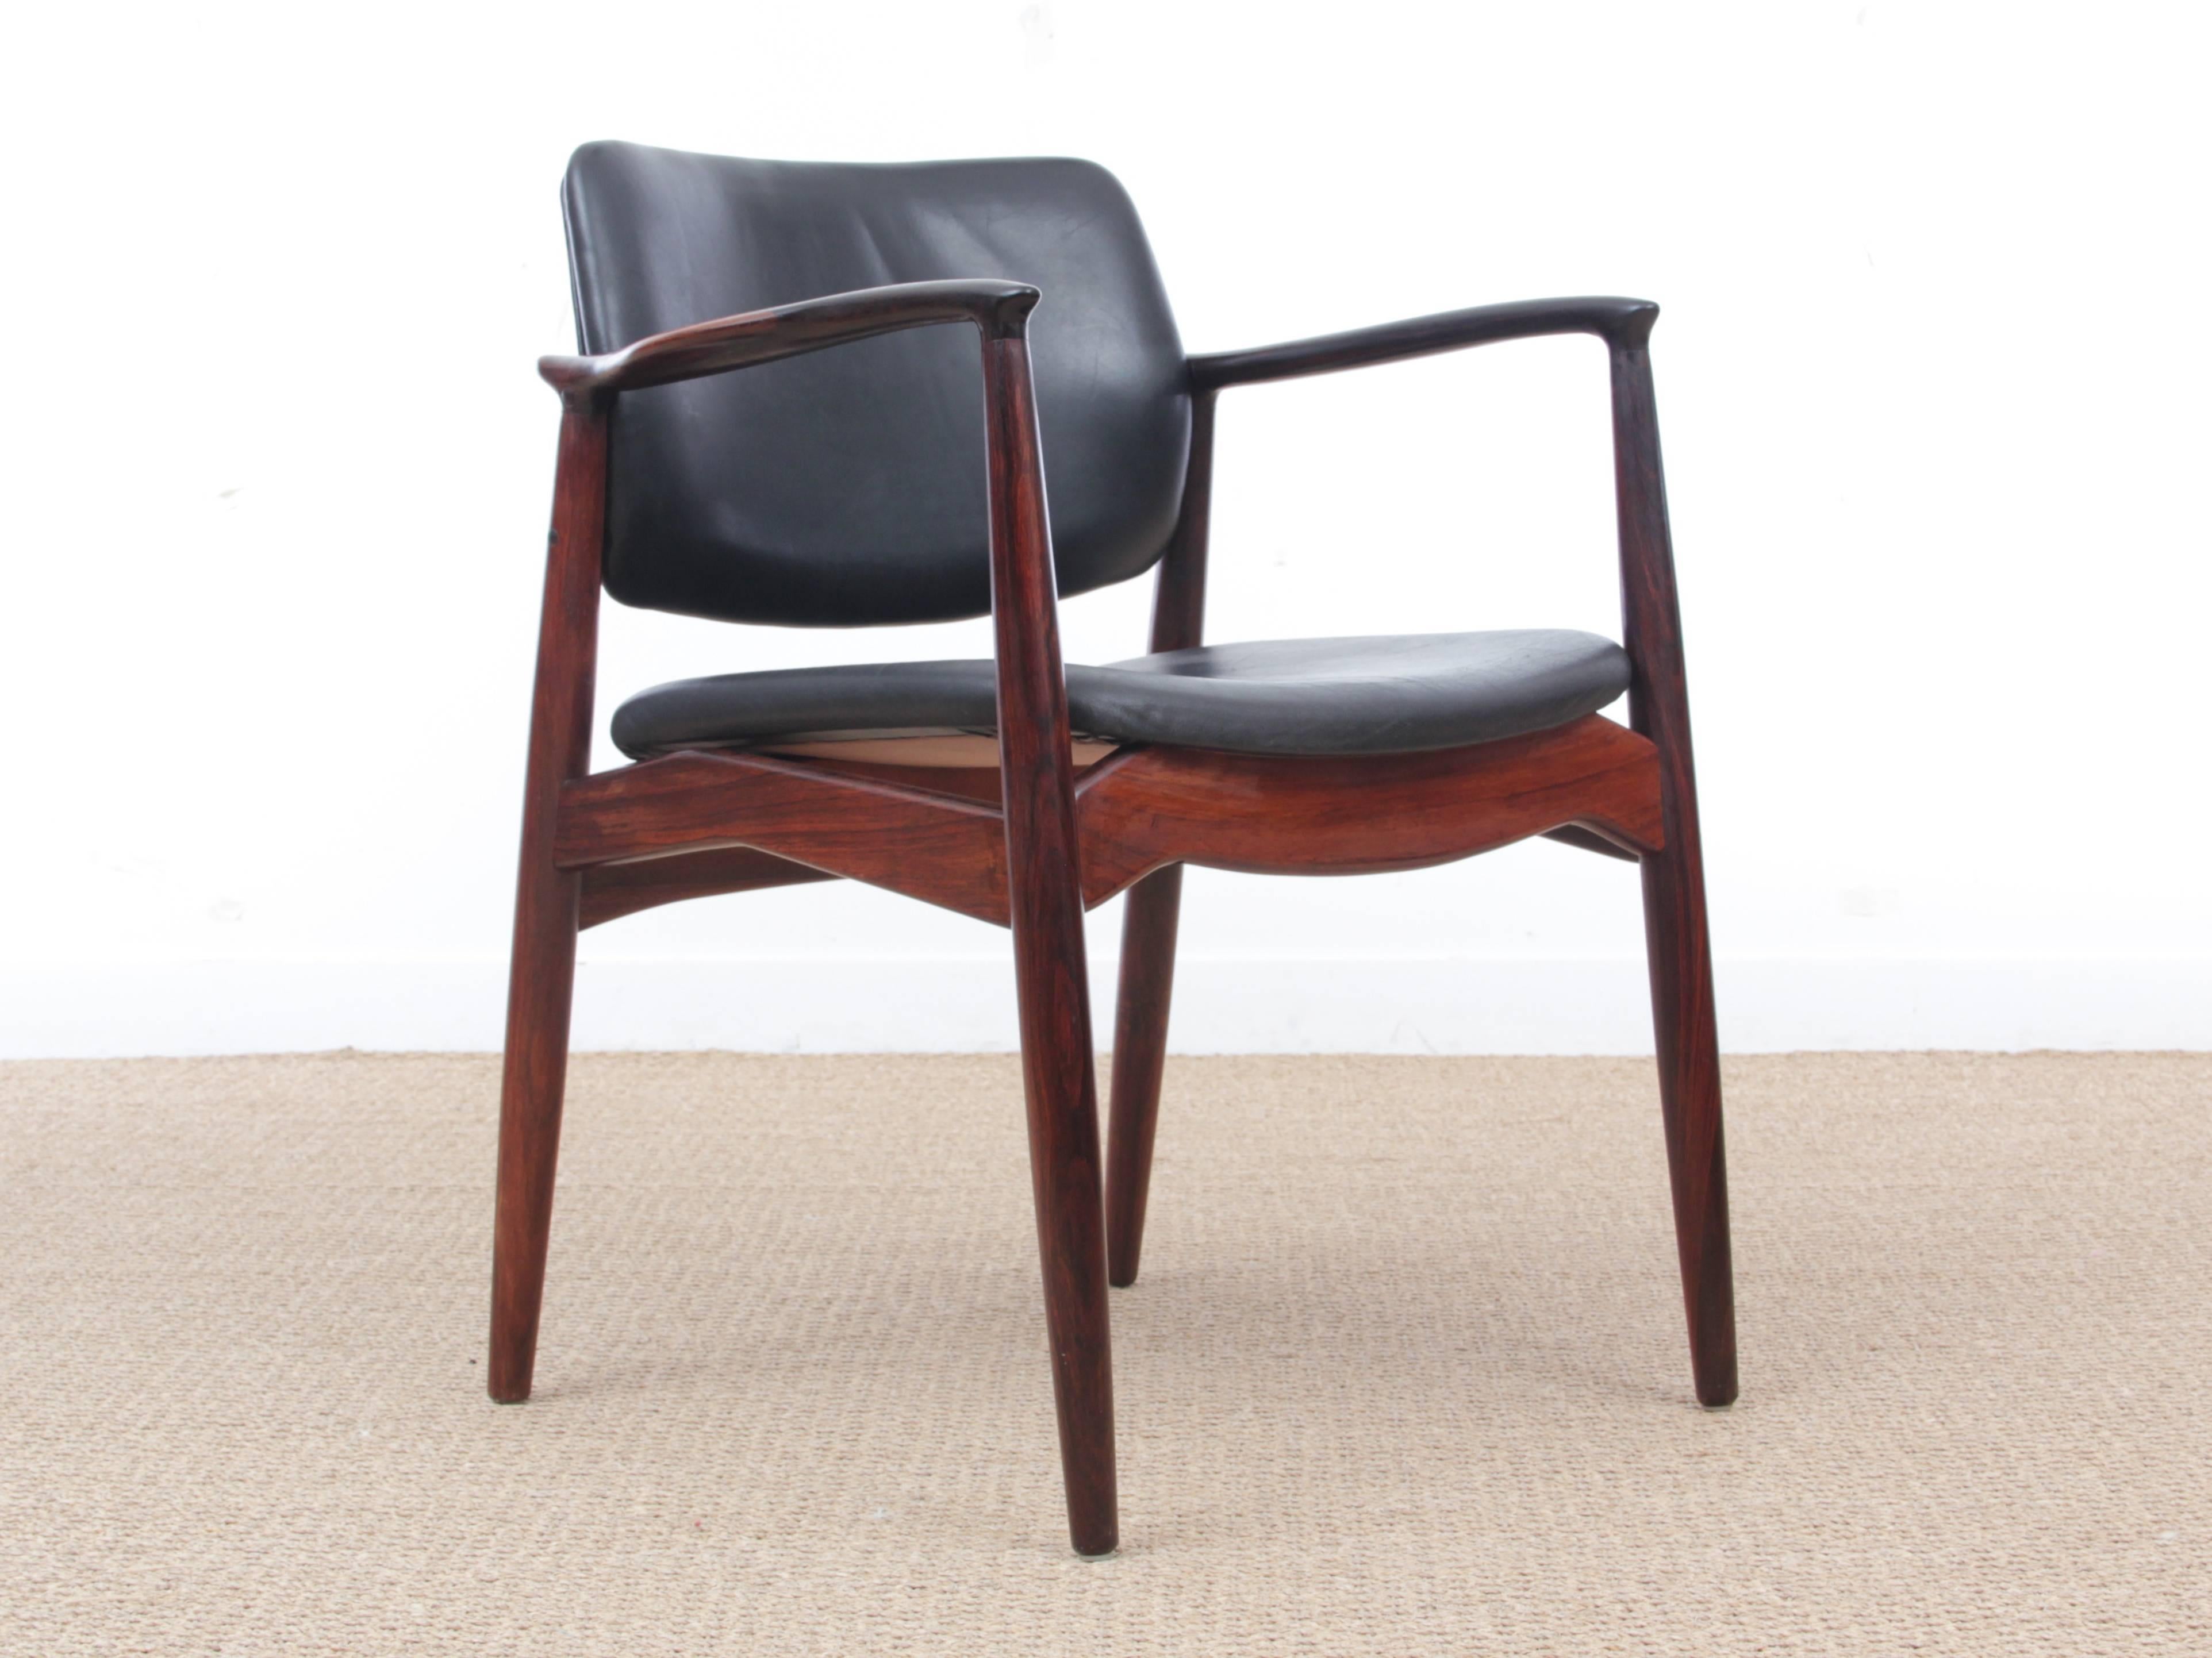 Mid-Century Modern Danish desk chair in rosewood model 66 by Erik Buck. Original leather covers. Referenced by the Design Museum Denmark under number RP17808.